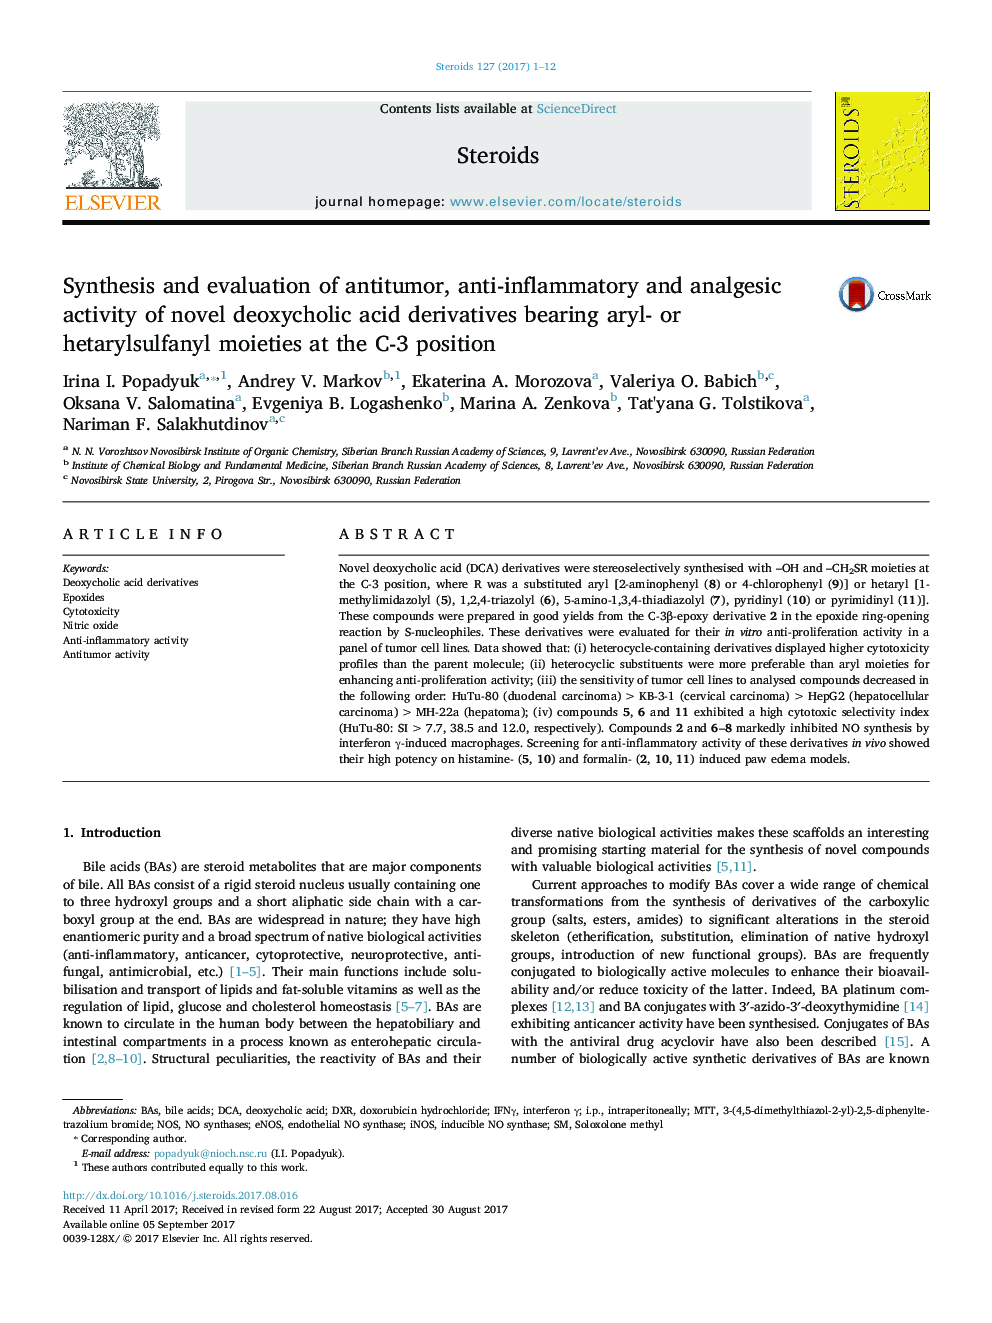 Synthesis and evaluation of antitumor, anti-inflammatory and analgesic activity of novel deoxycholic acid derivatives bearing aryl- or hetarylsulfanyl moieties at the C-3 position